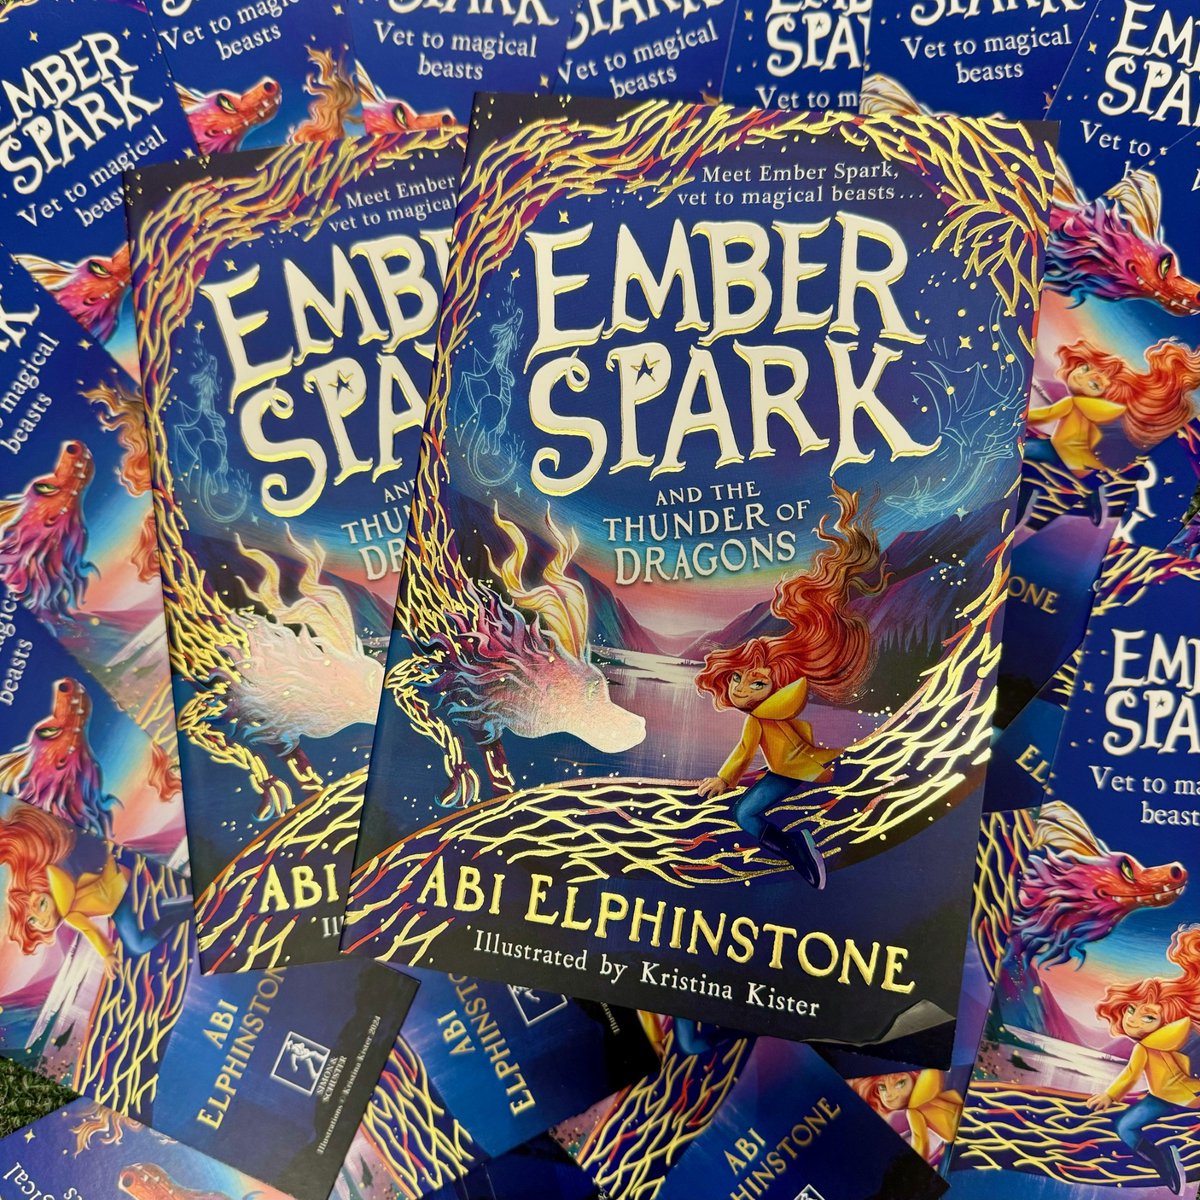 We're wishing a gloriously happy publication day to 'Ember Spark', new from the brilliant @abielphinstone + beautifully illustrated by @KristinaKister Abi's books are some of the greatest adventure stories for children and her characters just have THE BEST names. Always.